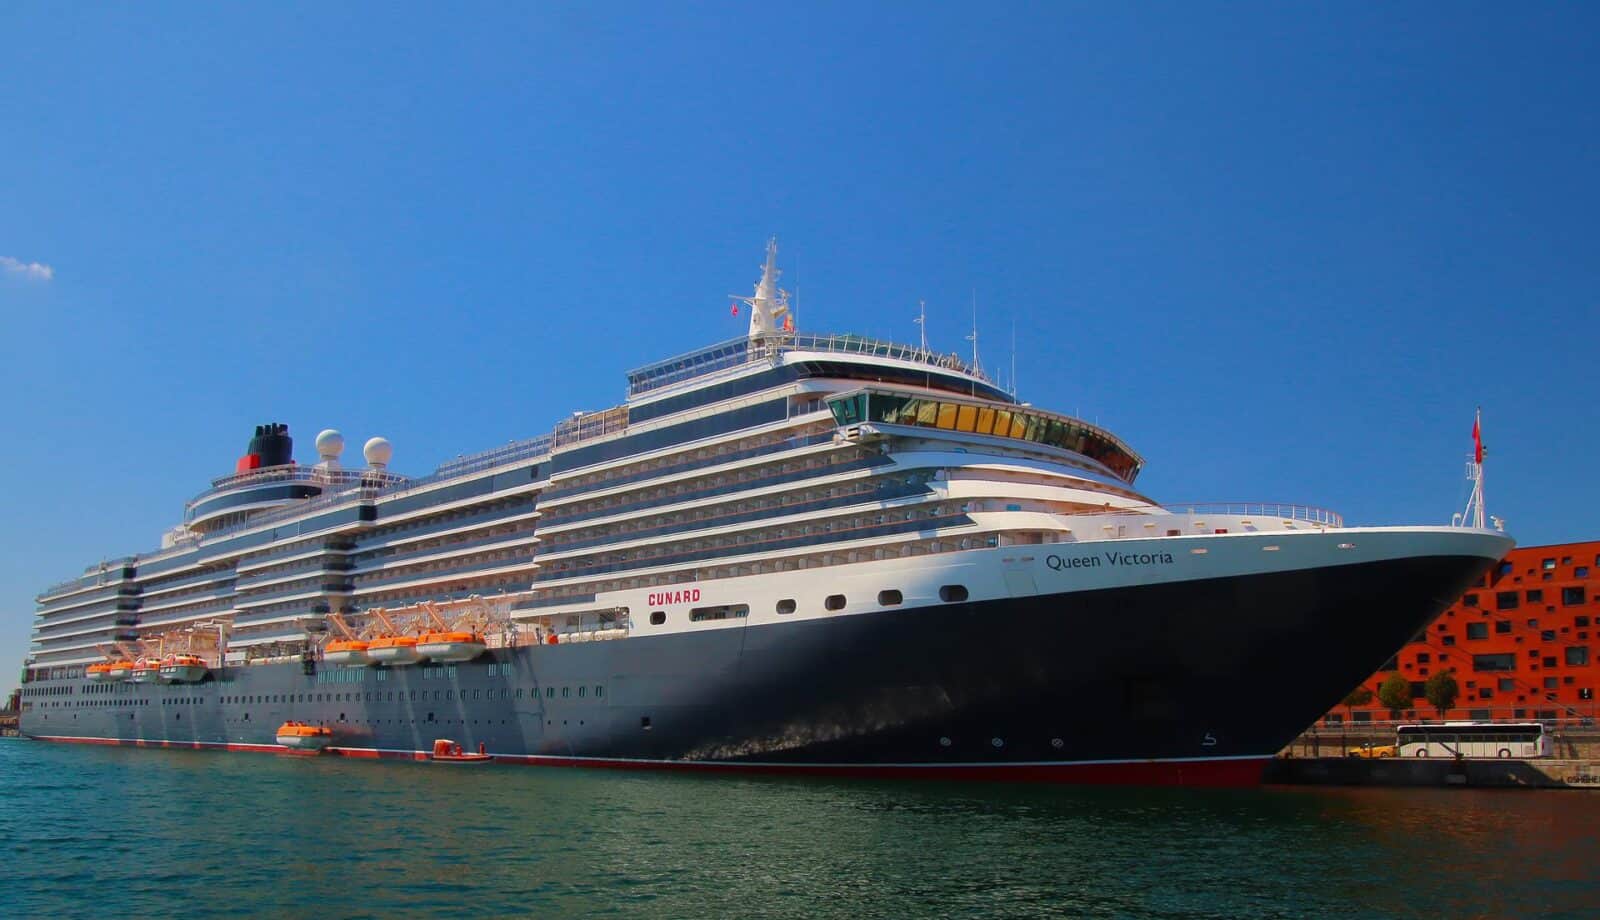 Cunard, carnival corp plc, carnival cruise lines, lines holland america line, carnival cruise lines holland, cruise lines holland america, holland america line princess, carnival plc, carnival cruise lines, costa cruises, p o cruises, seabourn cruise line, costa cruises